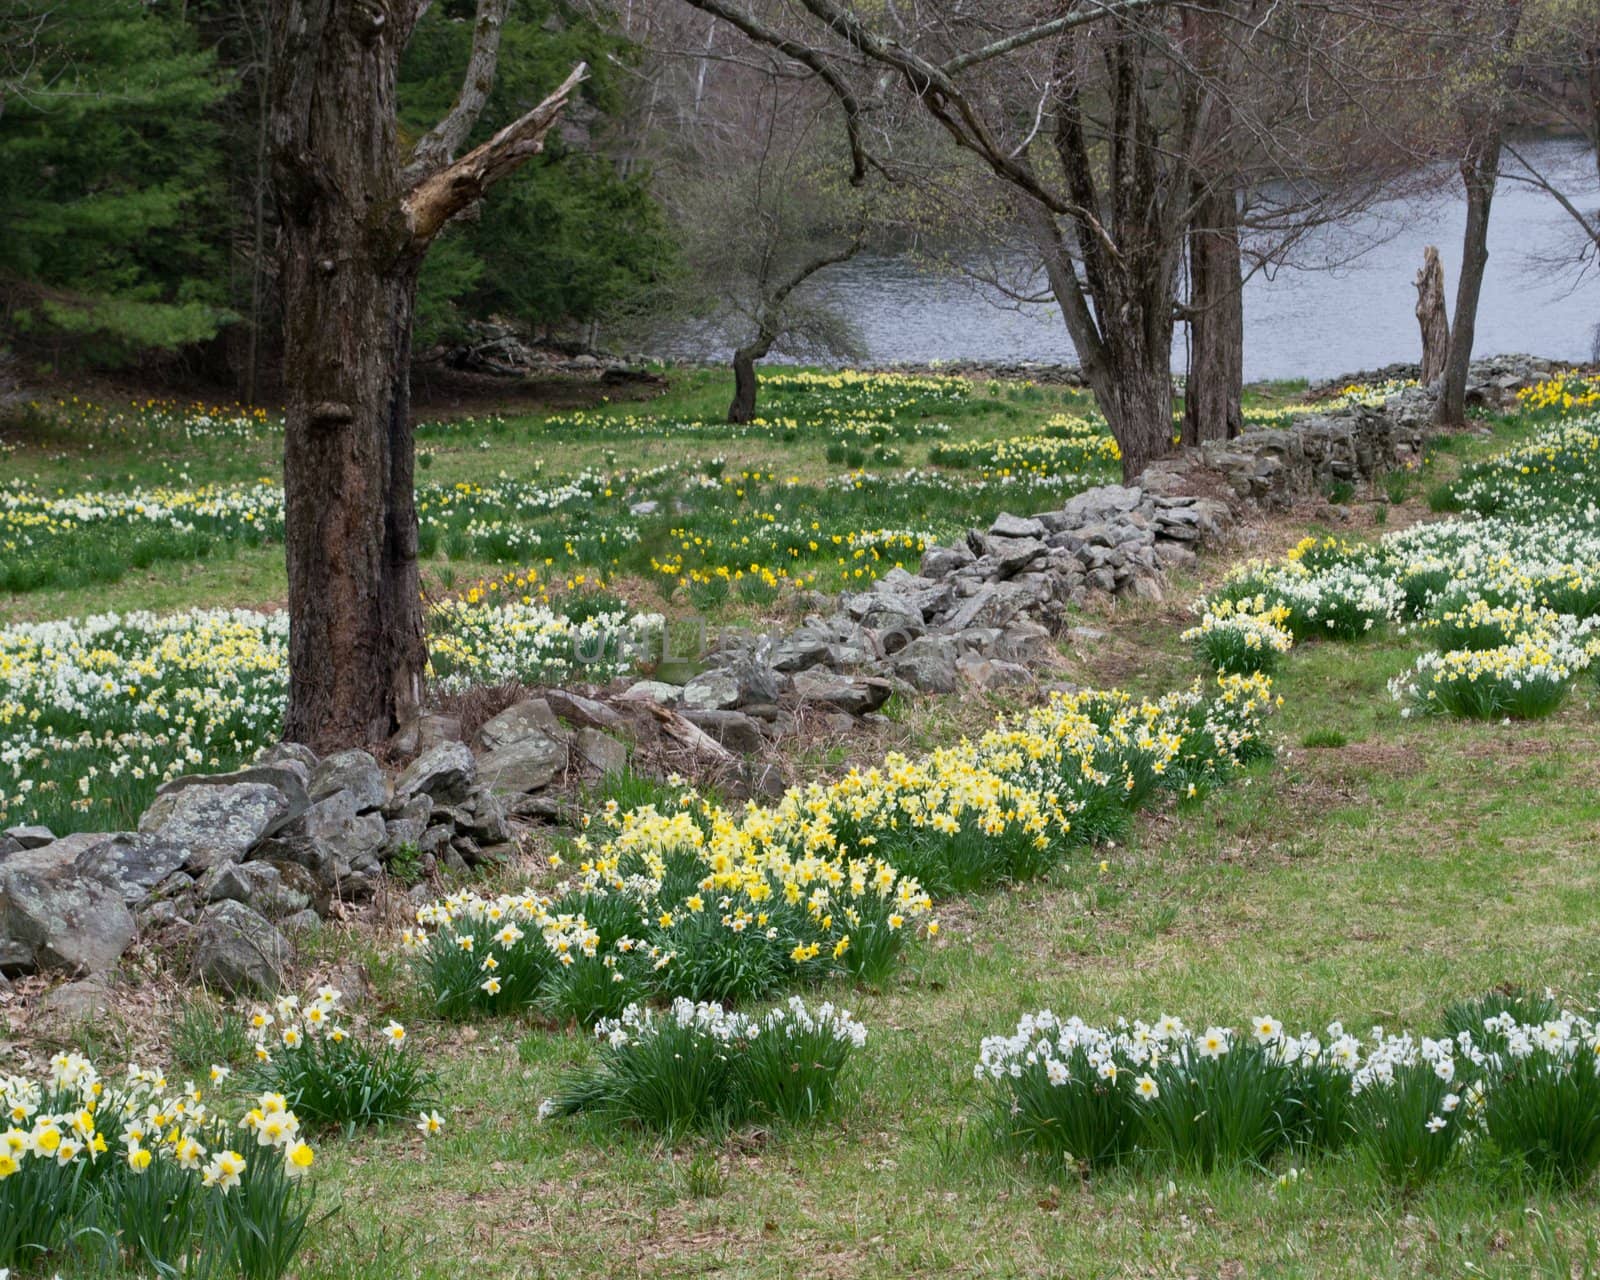 Yellow and white daffodils brightened the landscape in early spring at Laurel Ridge, Lithchfield, Connecticut.